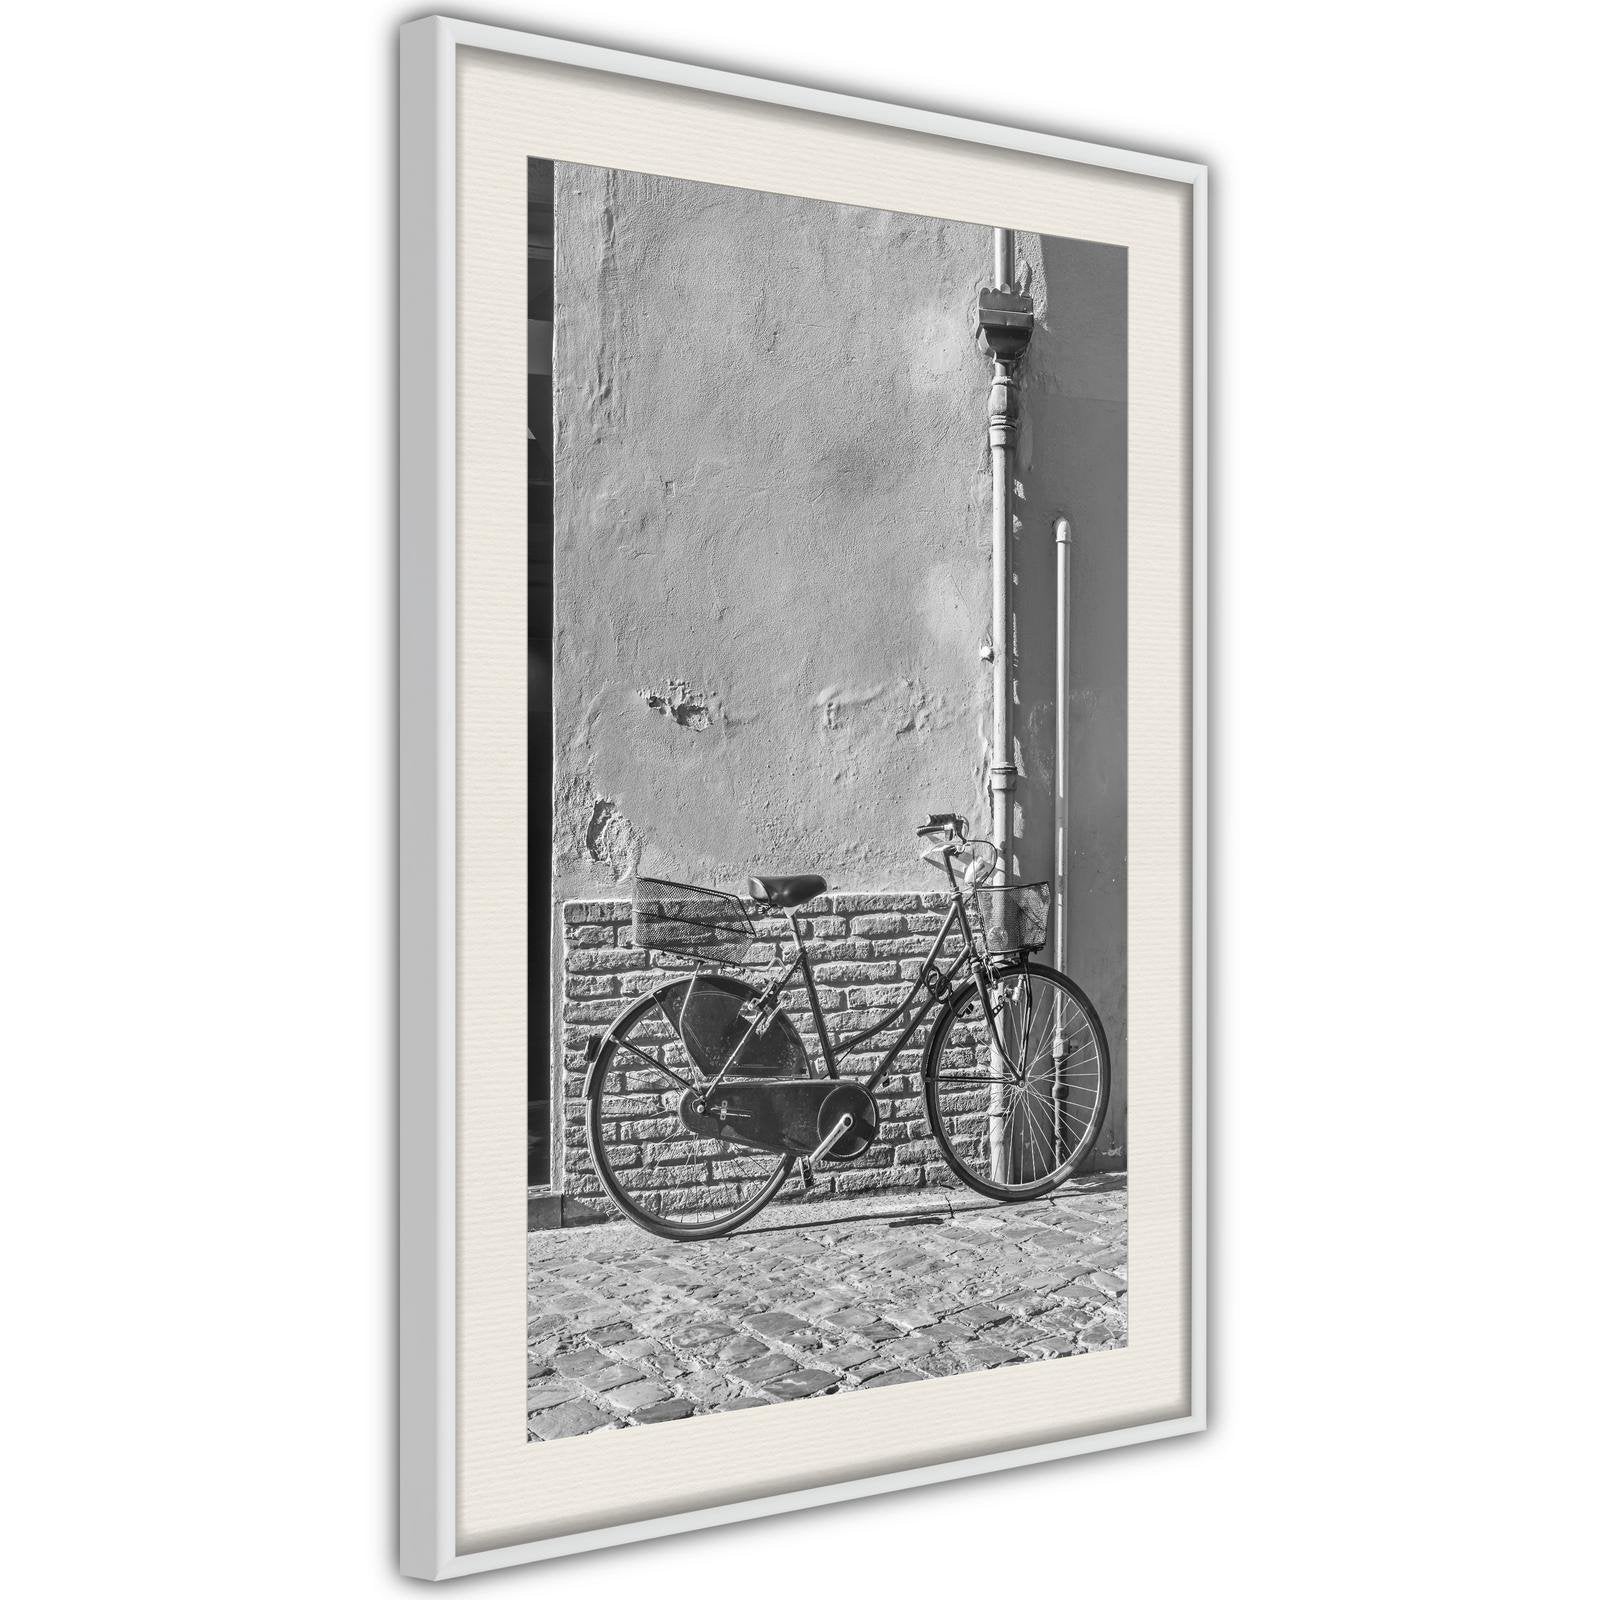 Inramad Poster / Tavla - Bicycle with Black Tires-Poster Inramad-Artgeist-peaceofhome.se